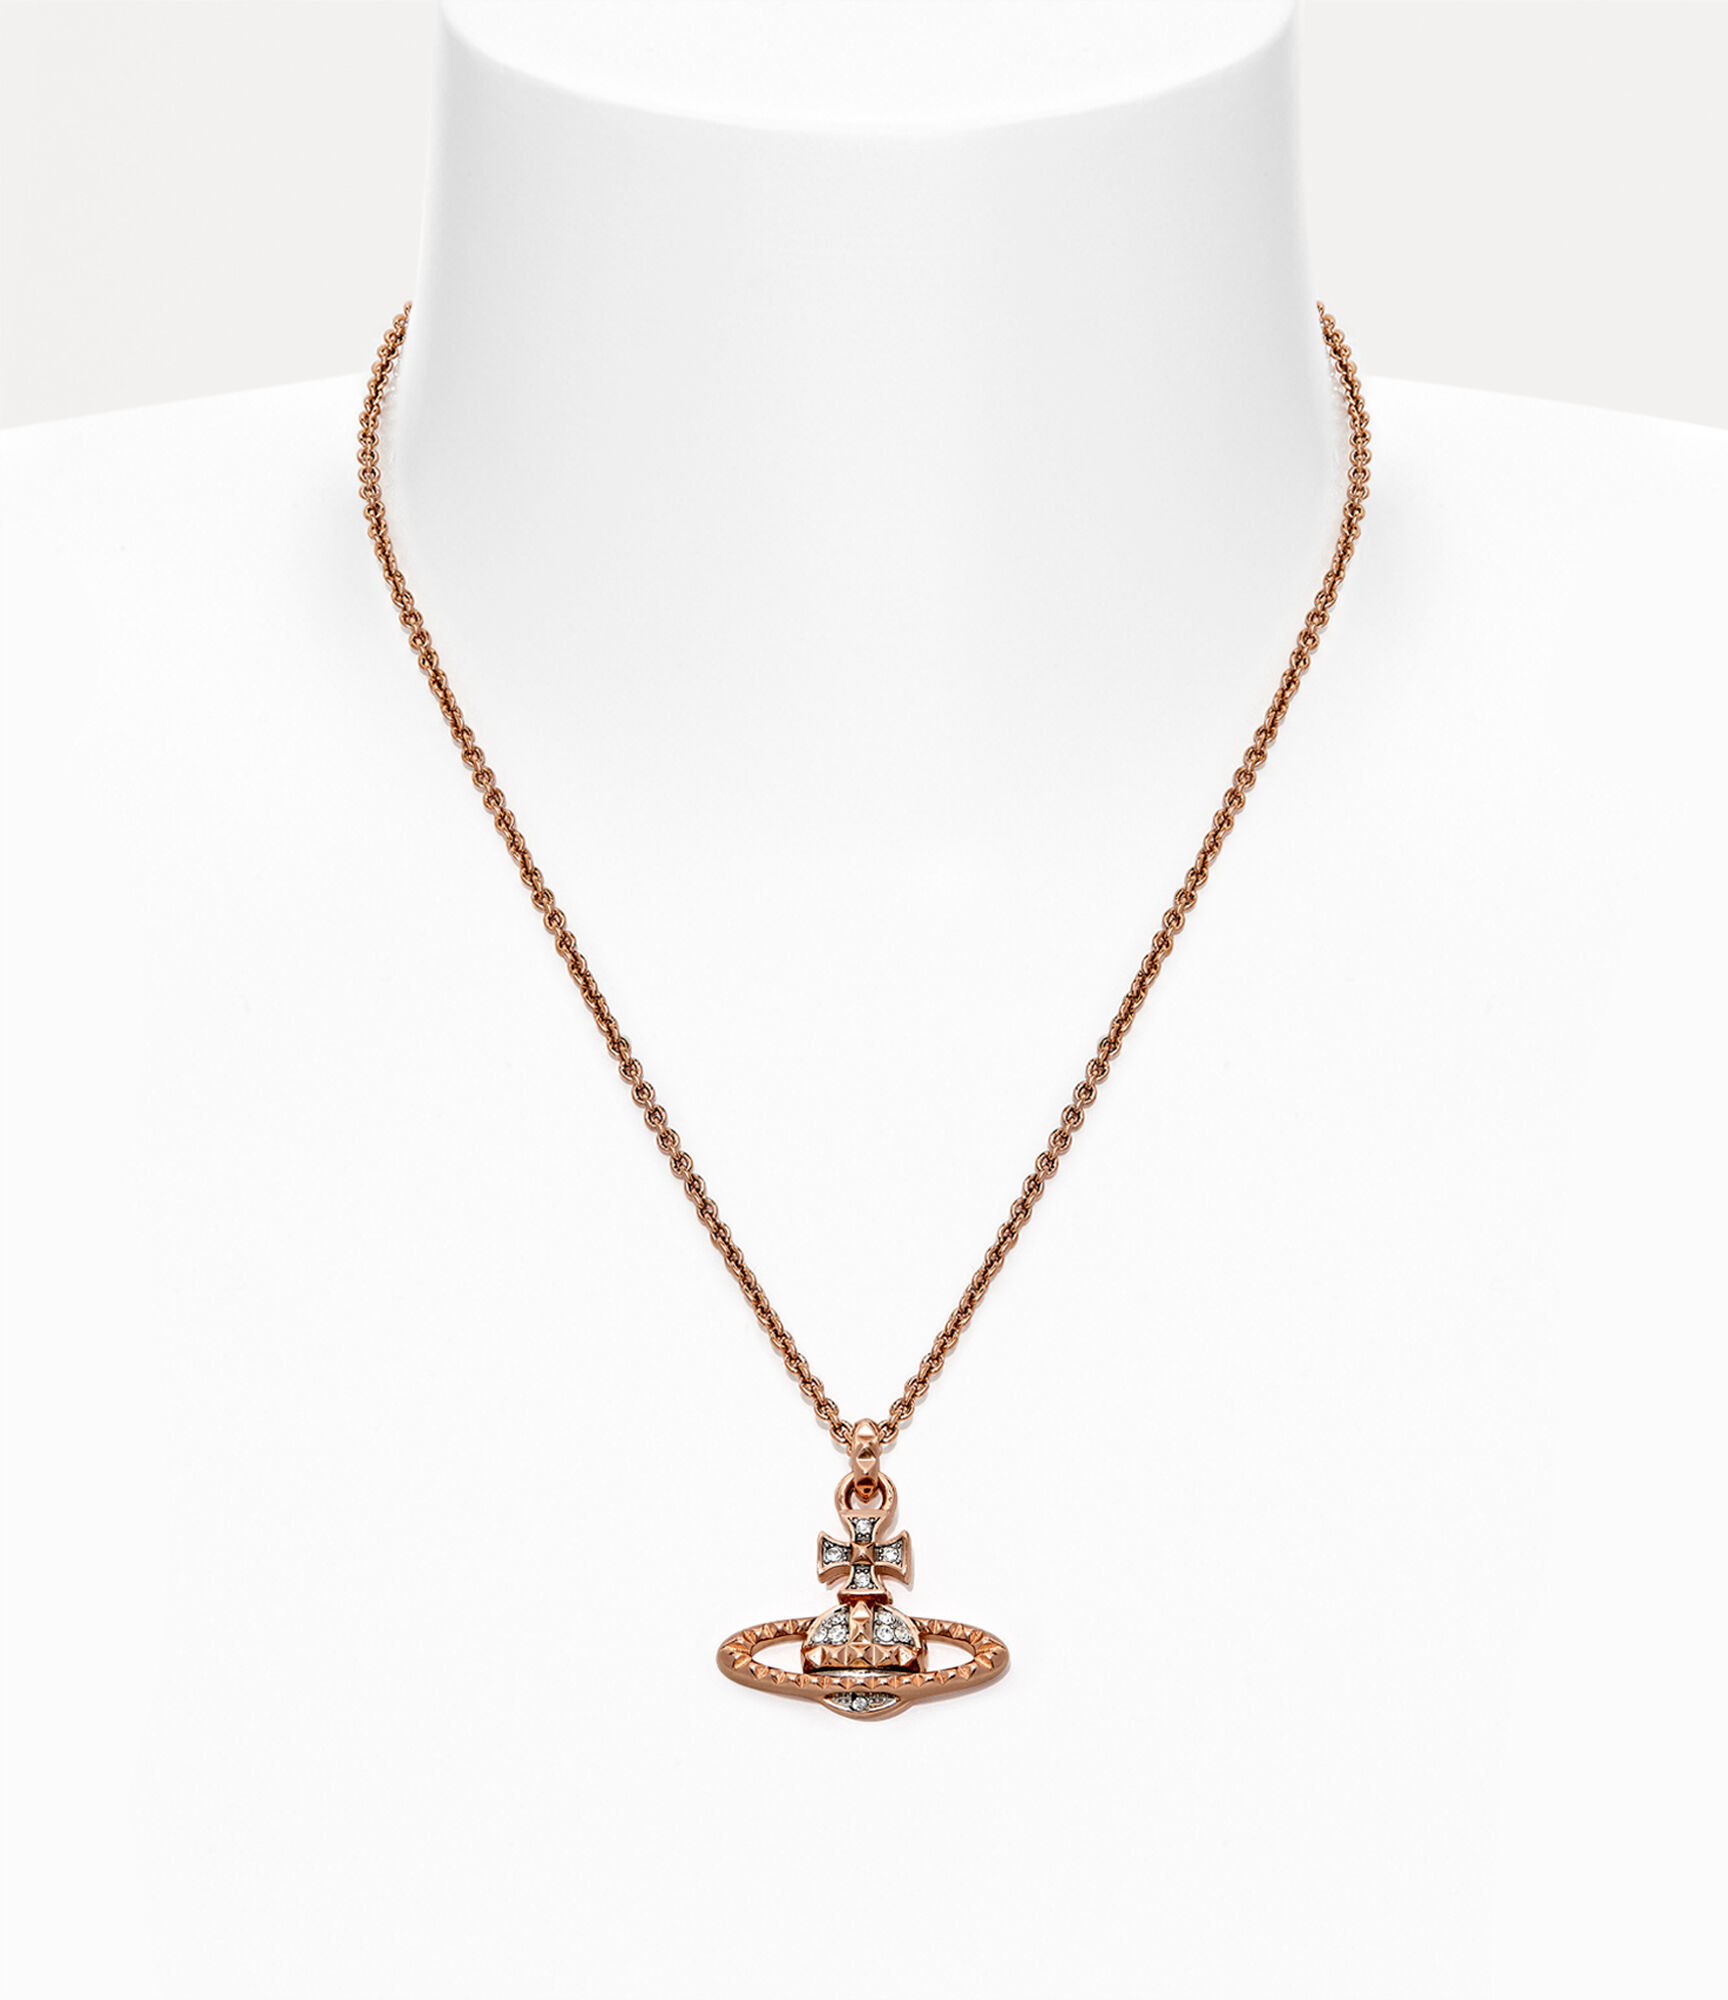 Vivienne Westwood Mayfair Bas Relief Gold-Plated Pendant